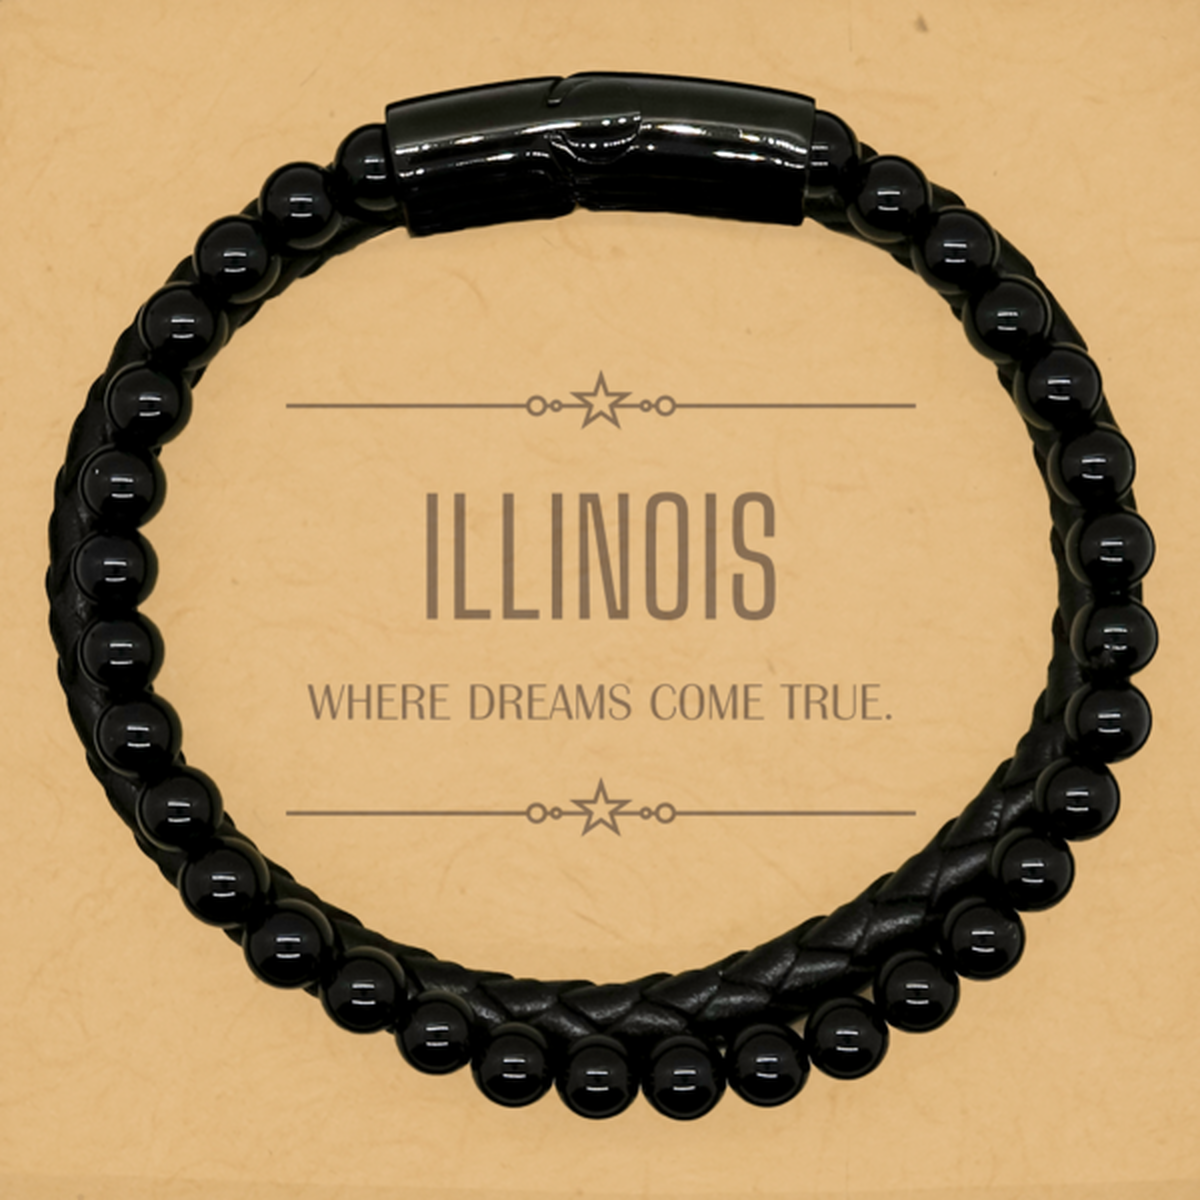 Love Illinois State Stone Leather Bracelets, Illinois Where dreams come true, Birthday Inspirational Gifts For Illinois Men, Women, Friends